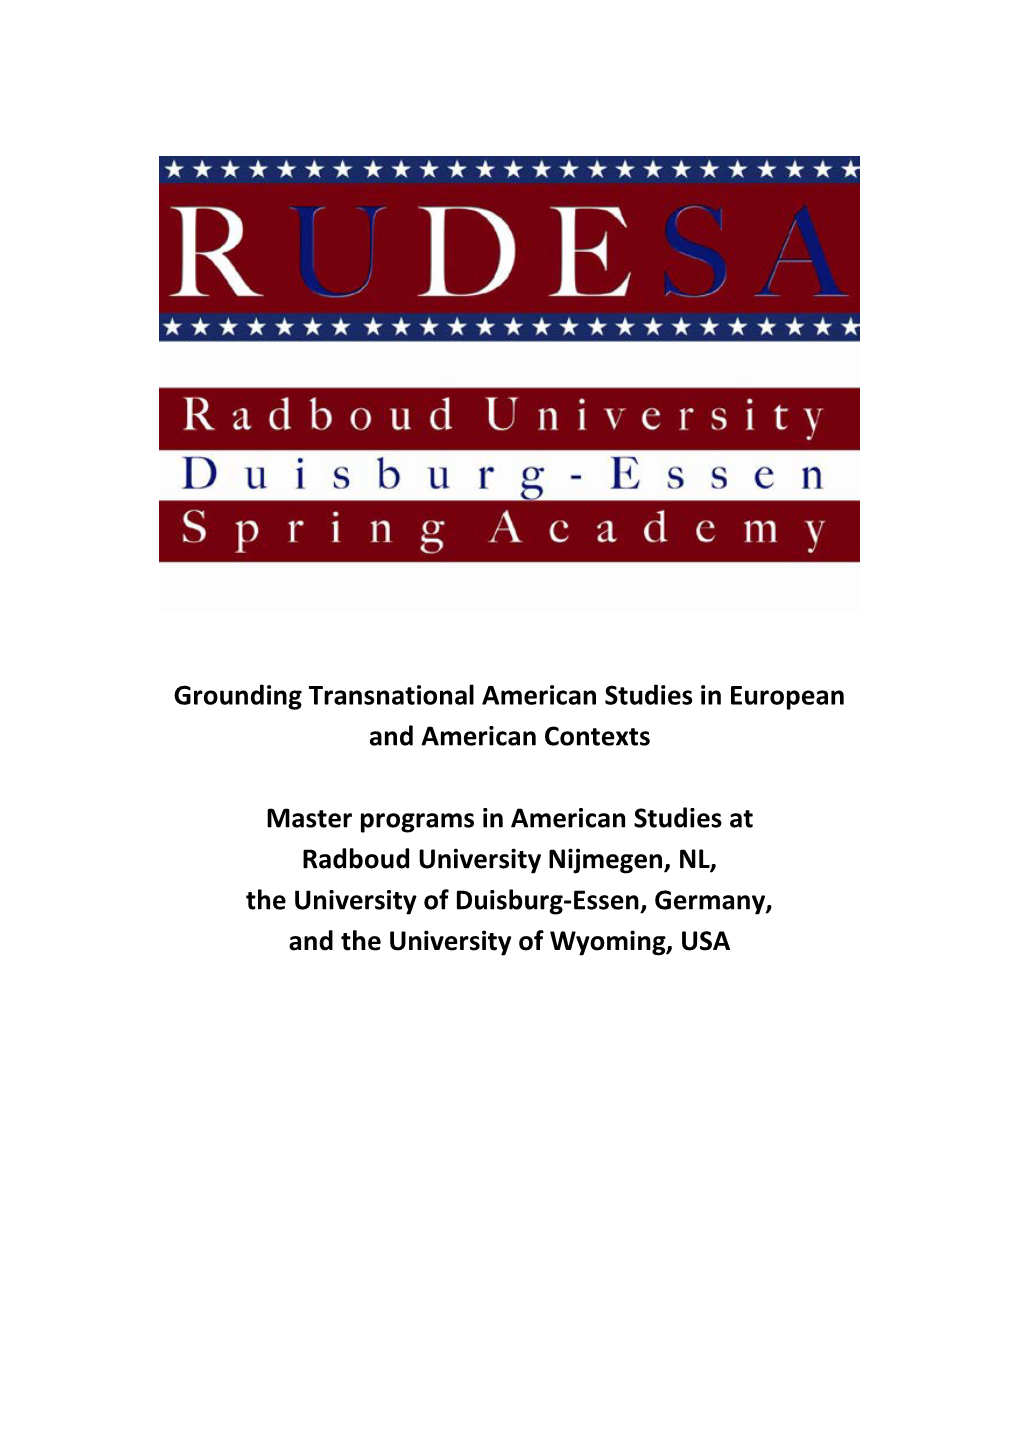 Grounding Transnational American Studies in European and American Contexts